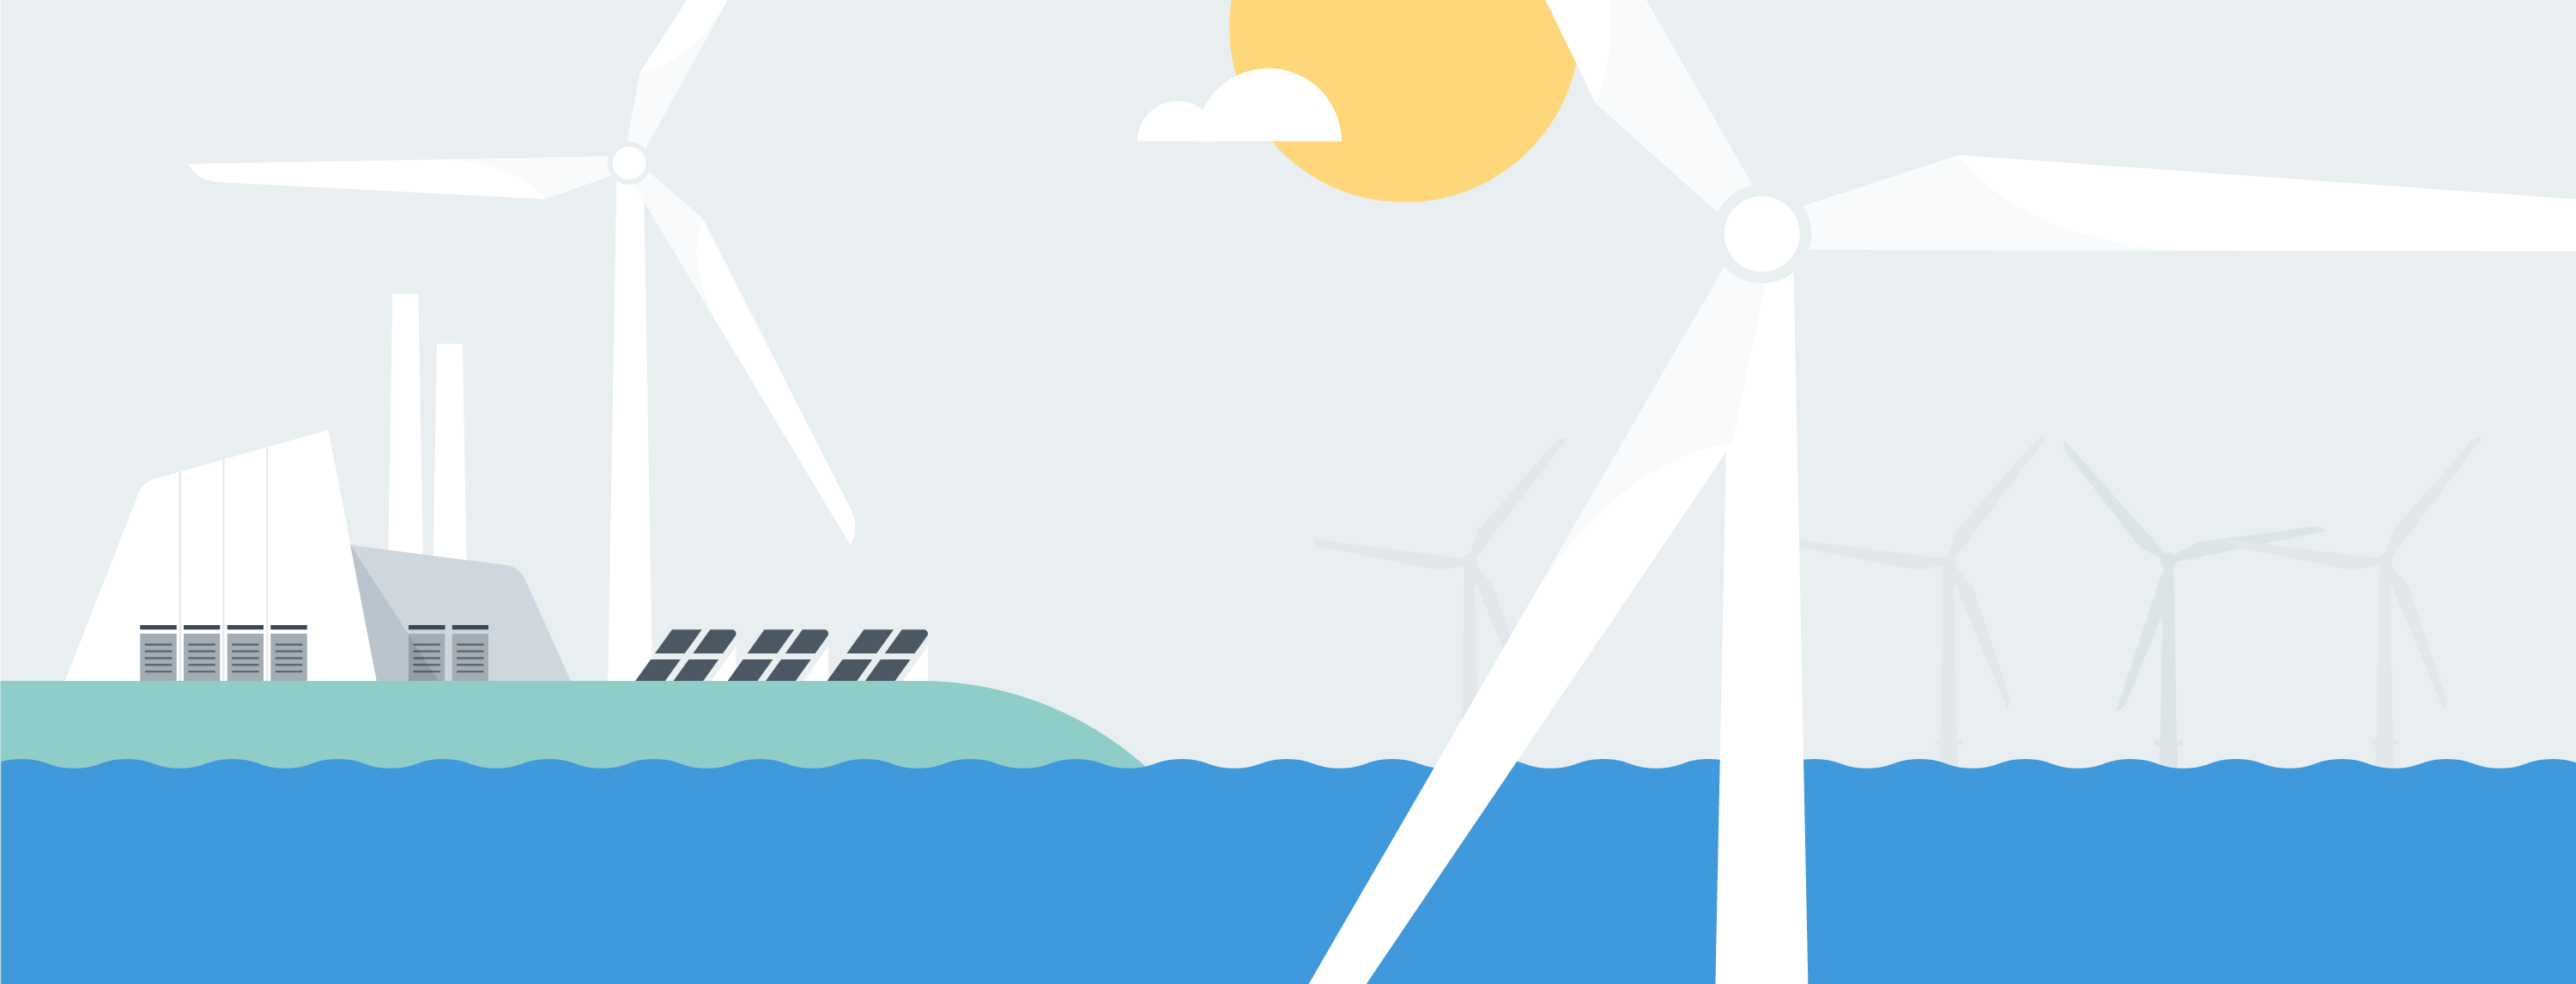 Is offshore wind power reliable?